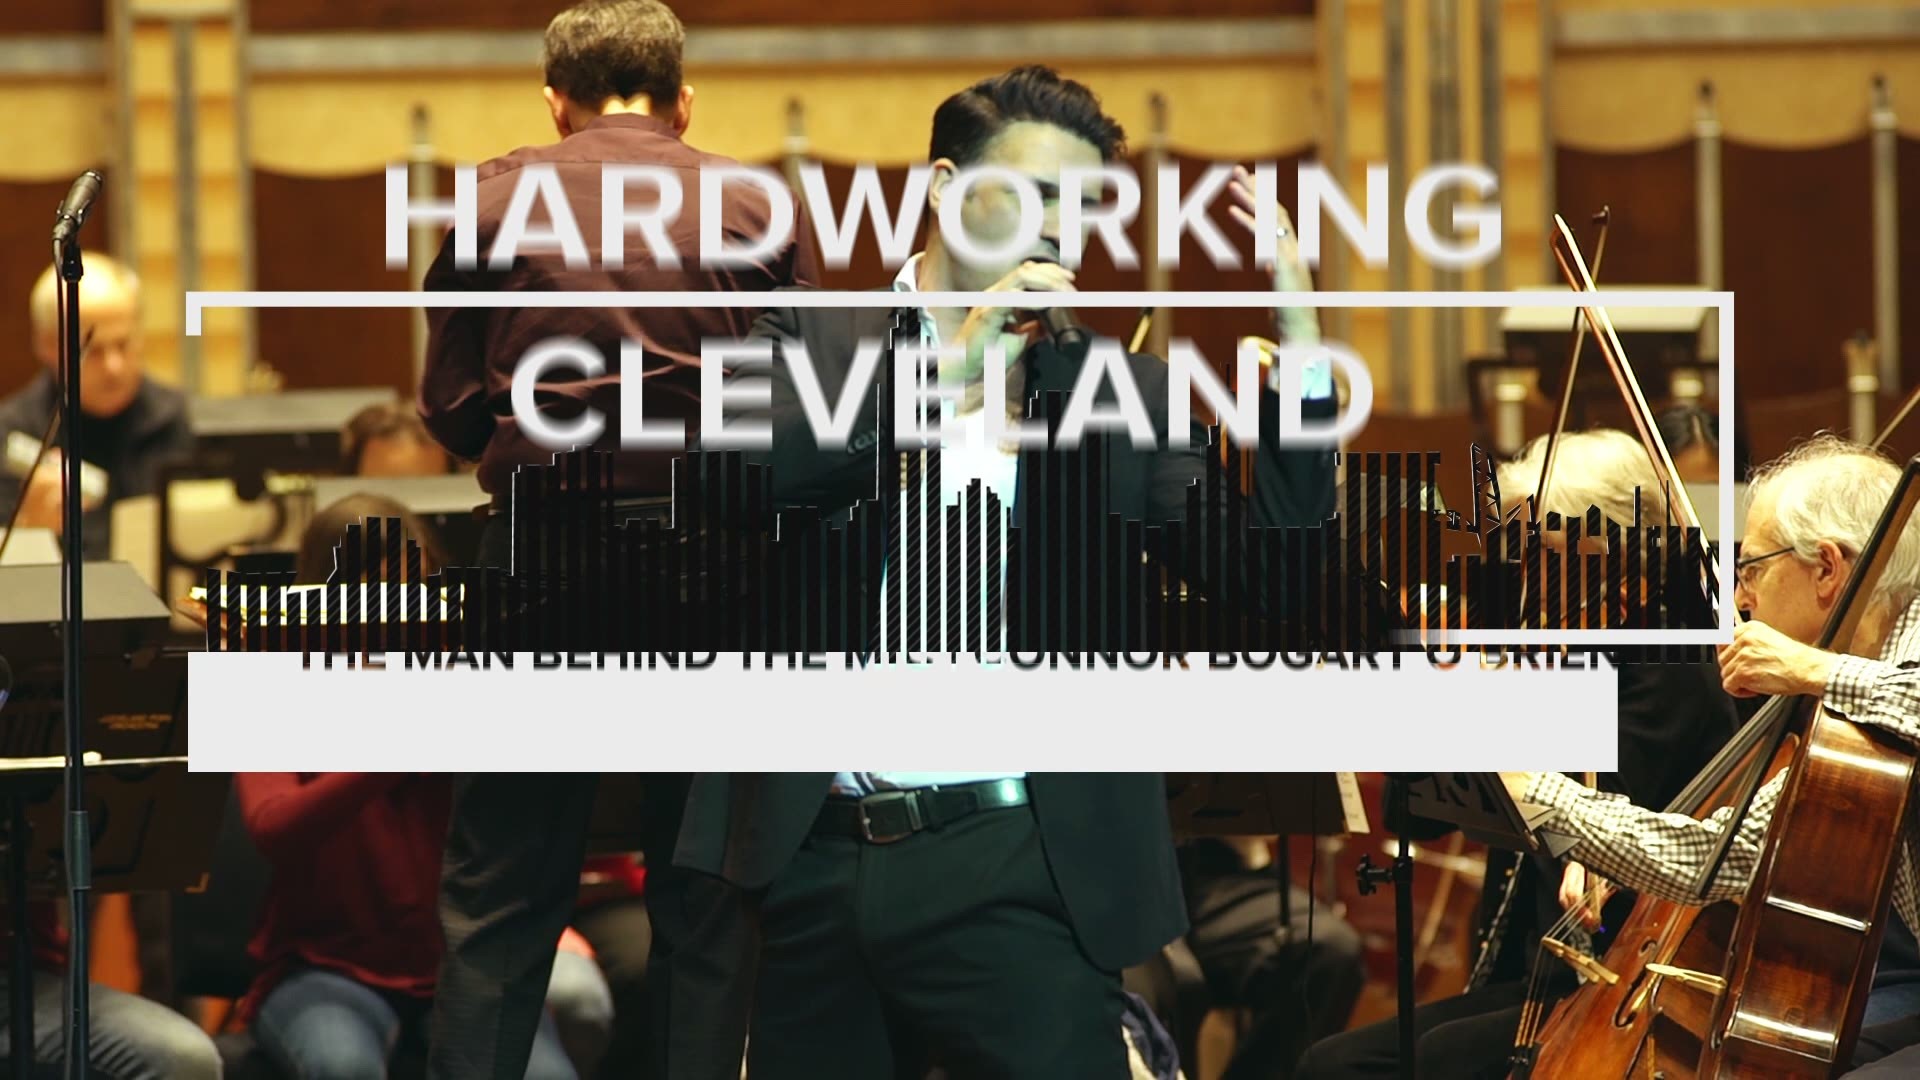 HARDWORKING CLEVELAND | 16 | Hardworking Cleveland is a WKYC digital web-series about Clevelanders hard at work. This story is with CLE singer Connor Bogart O'Brien.